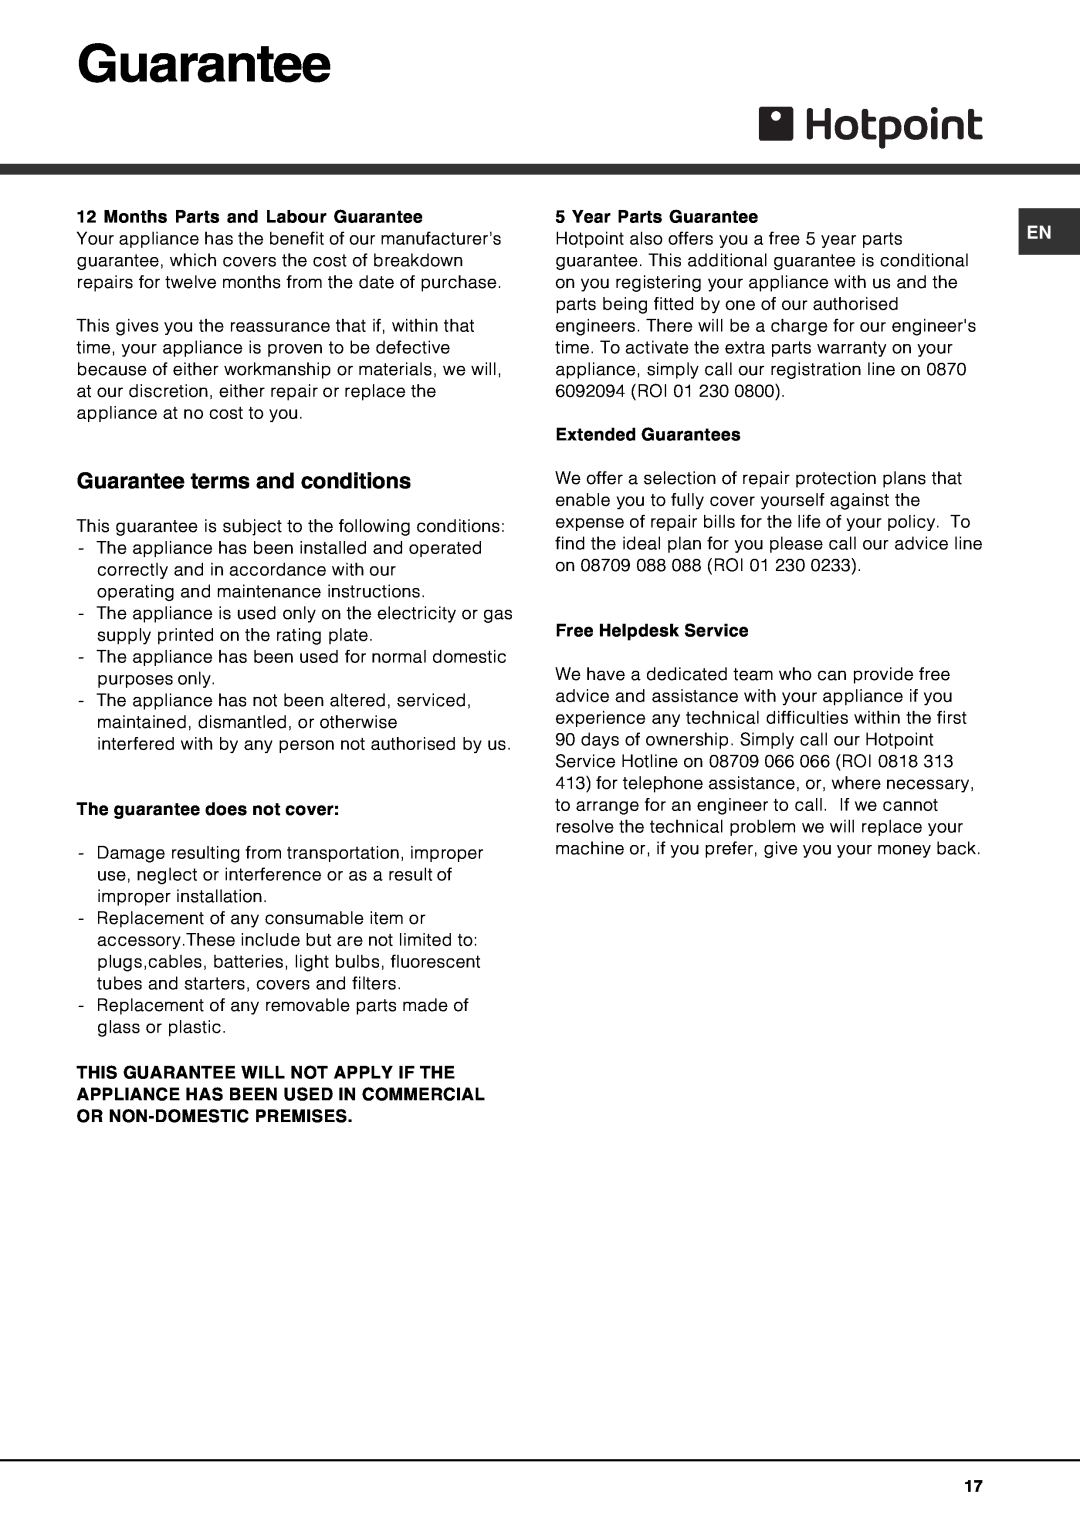 Hotpoint FDF-780 manual Guarantee terms and conditions 